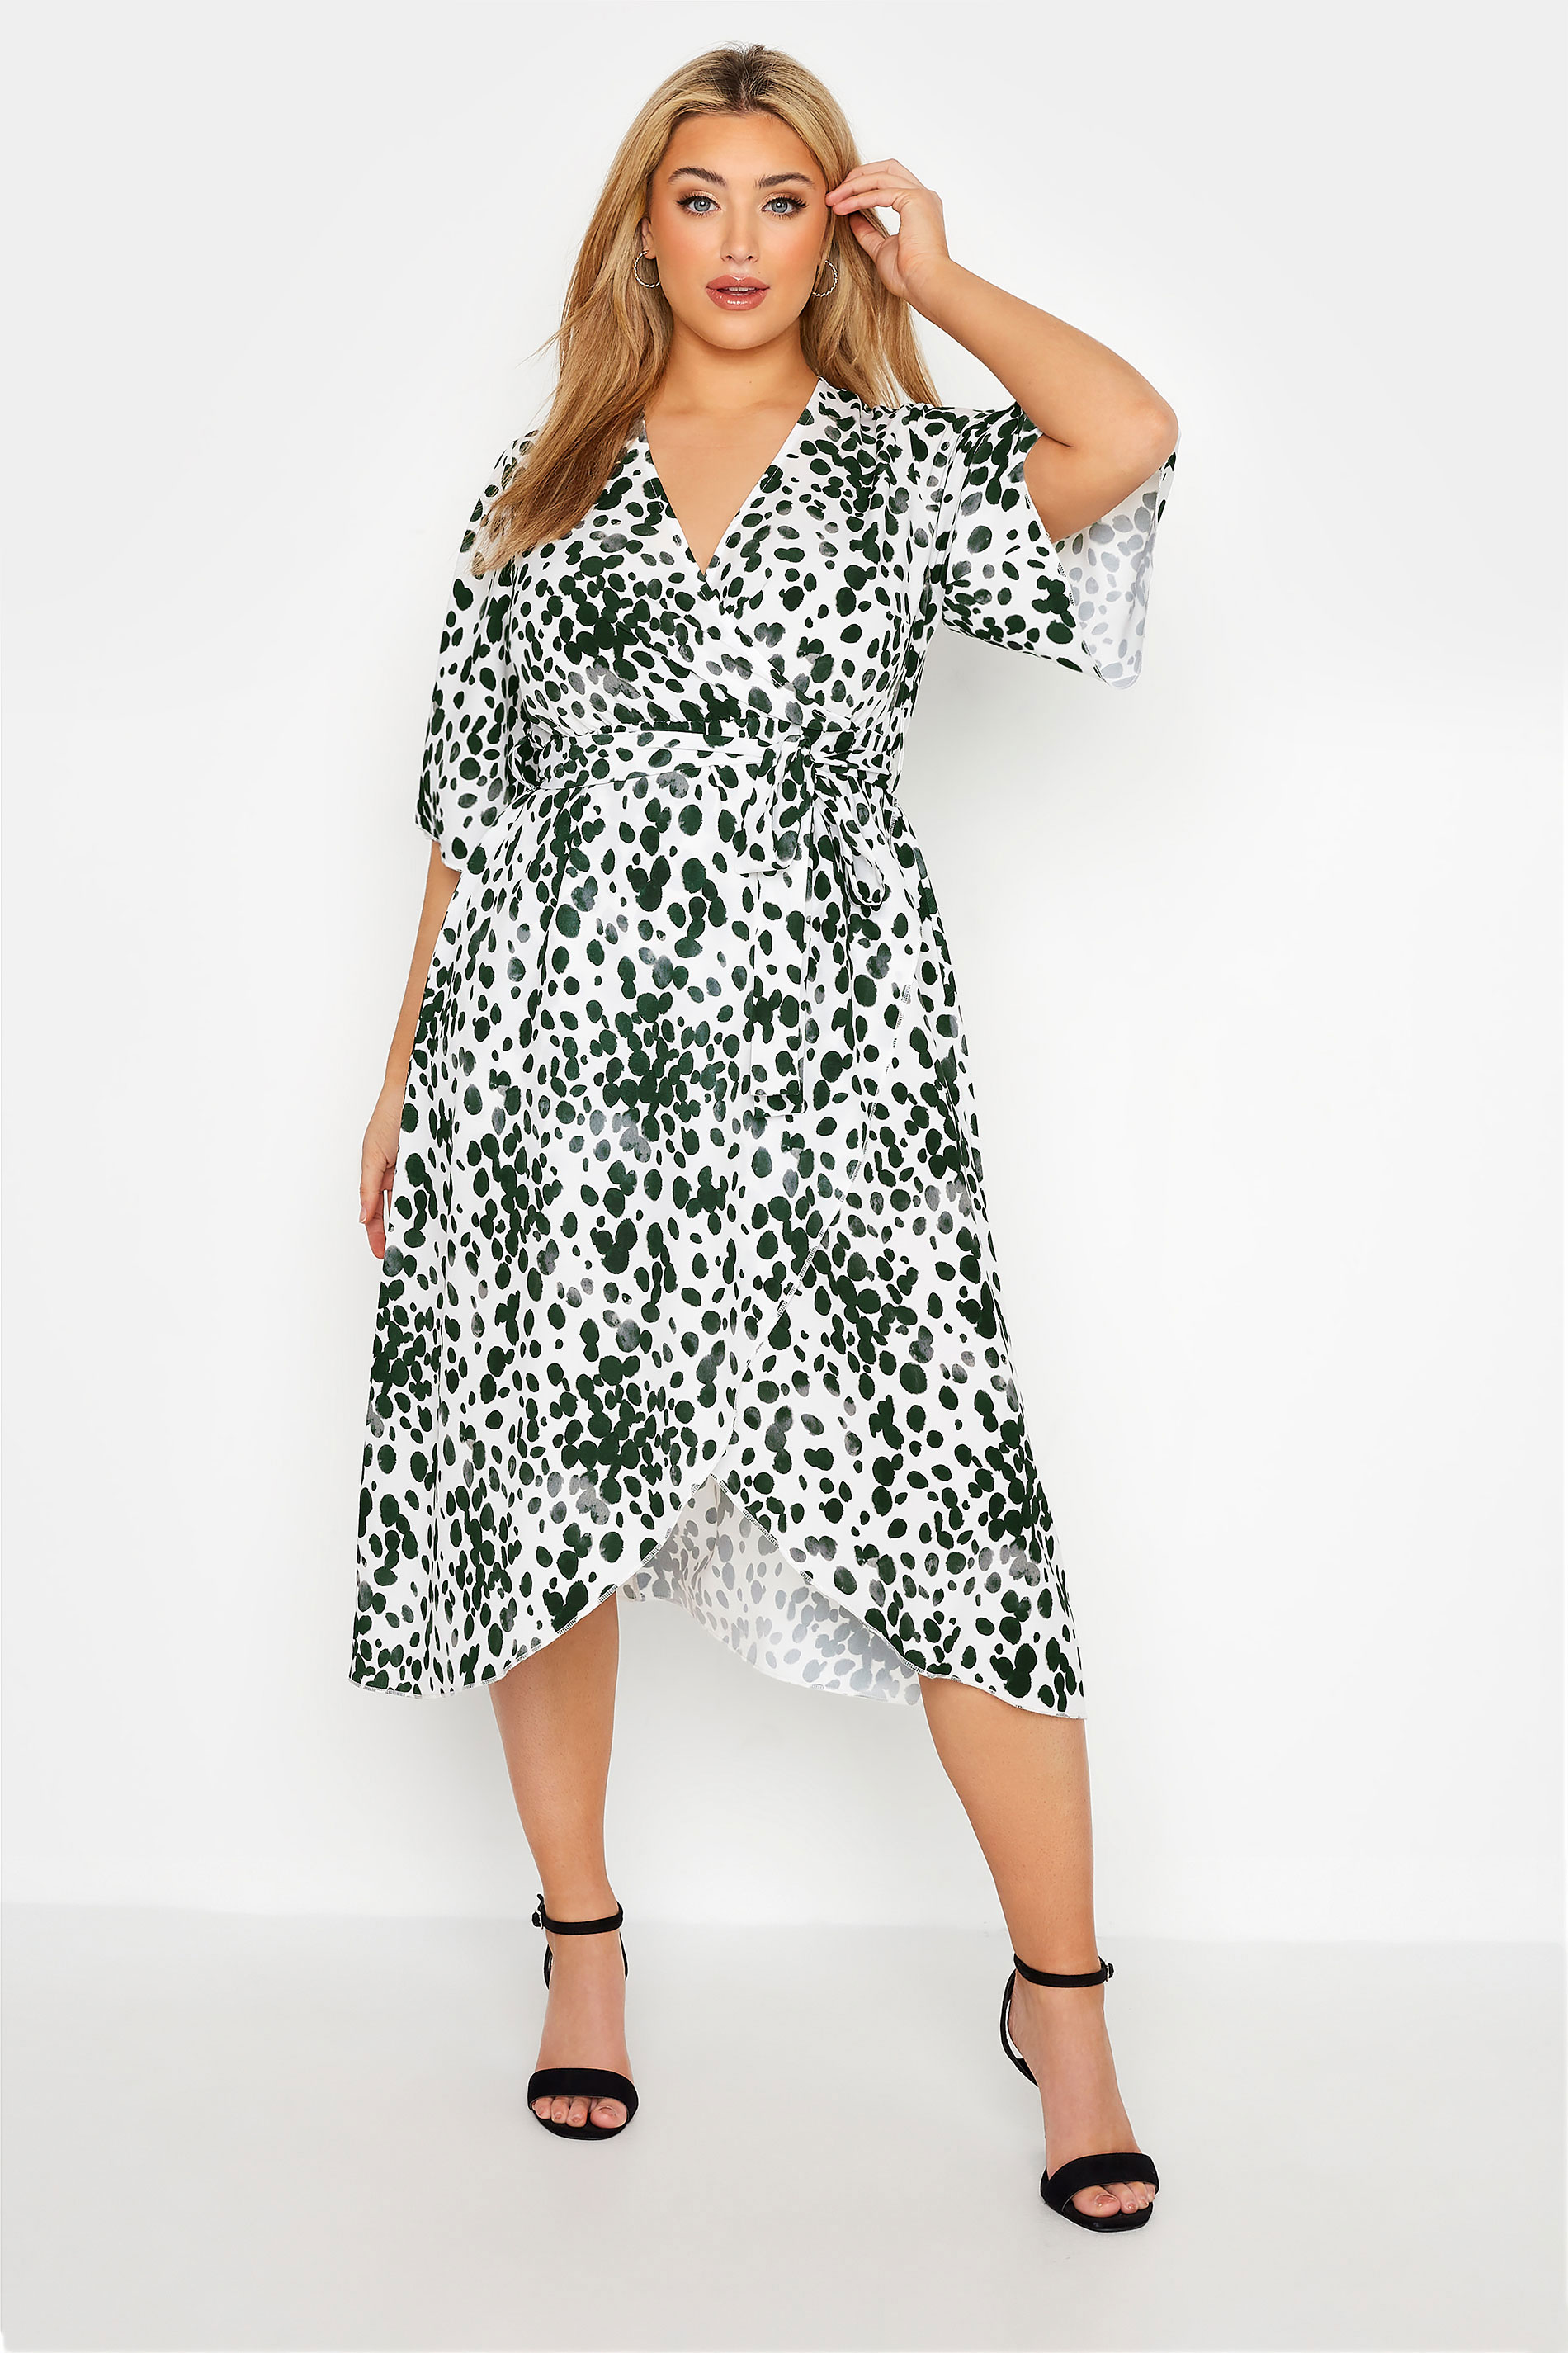 Robes Grande Taille Grande taille  Robes Portefeuilles | YOURS LONDON - Robe Blanche Dalmatien Style Portefeuille - TK63826